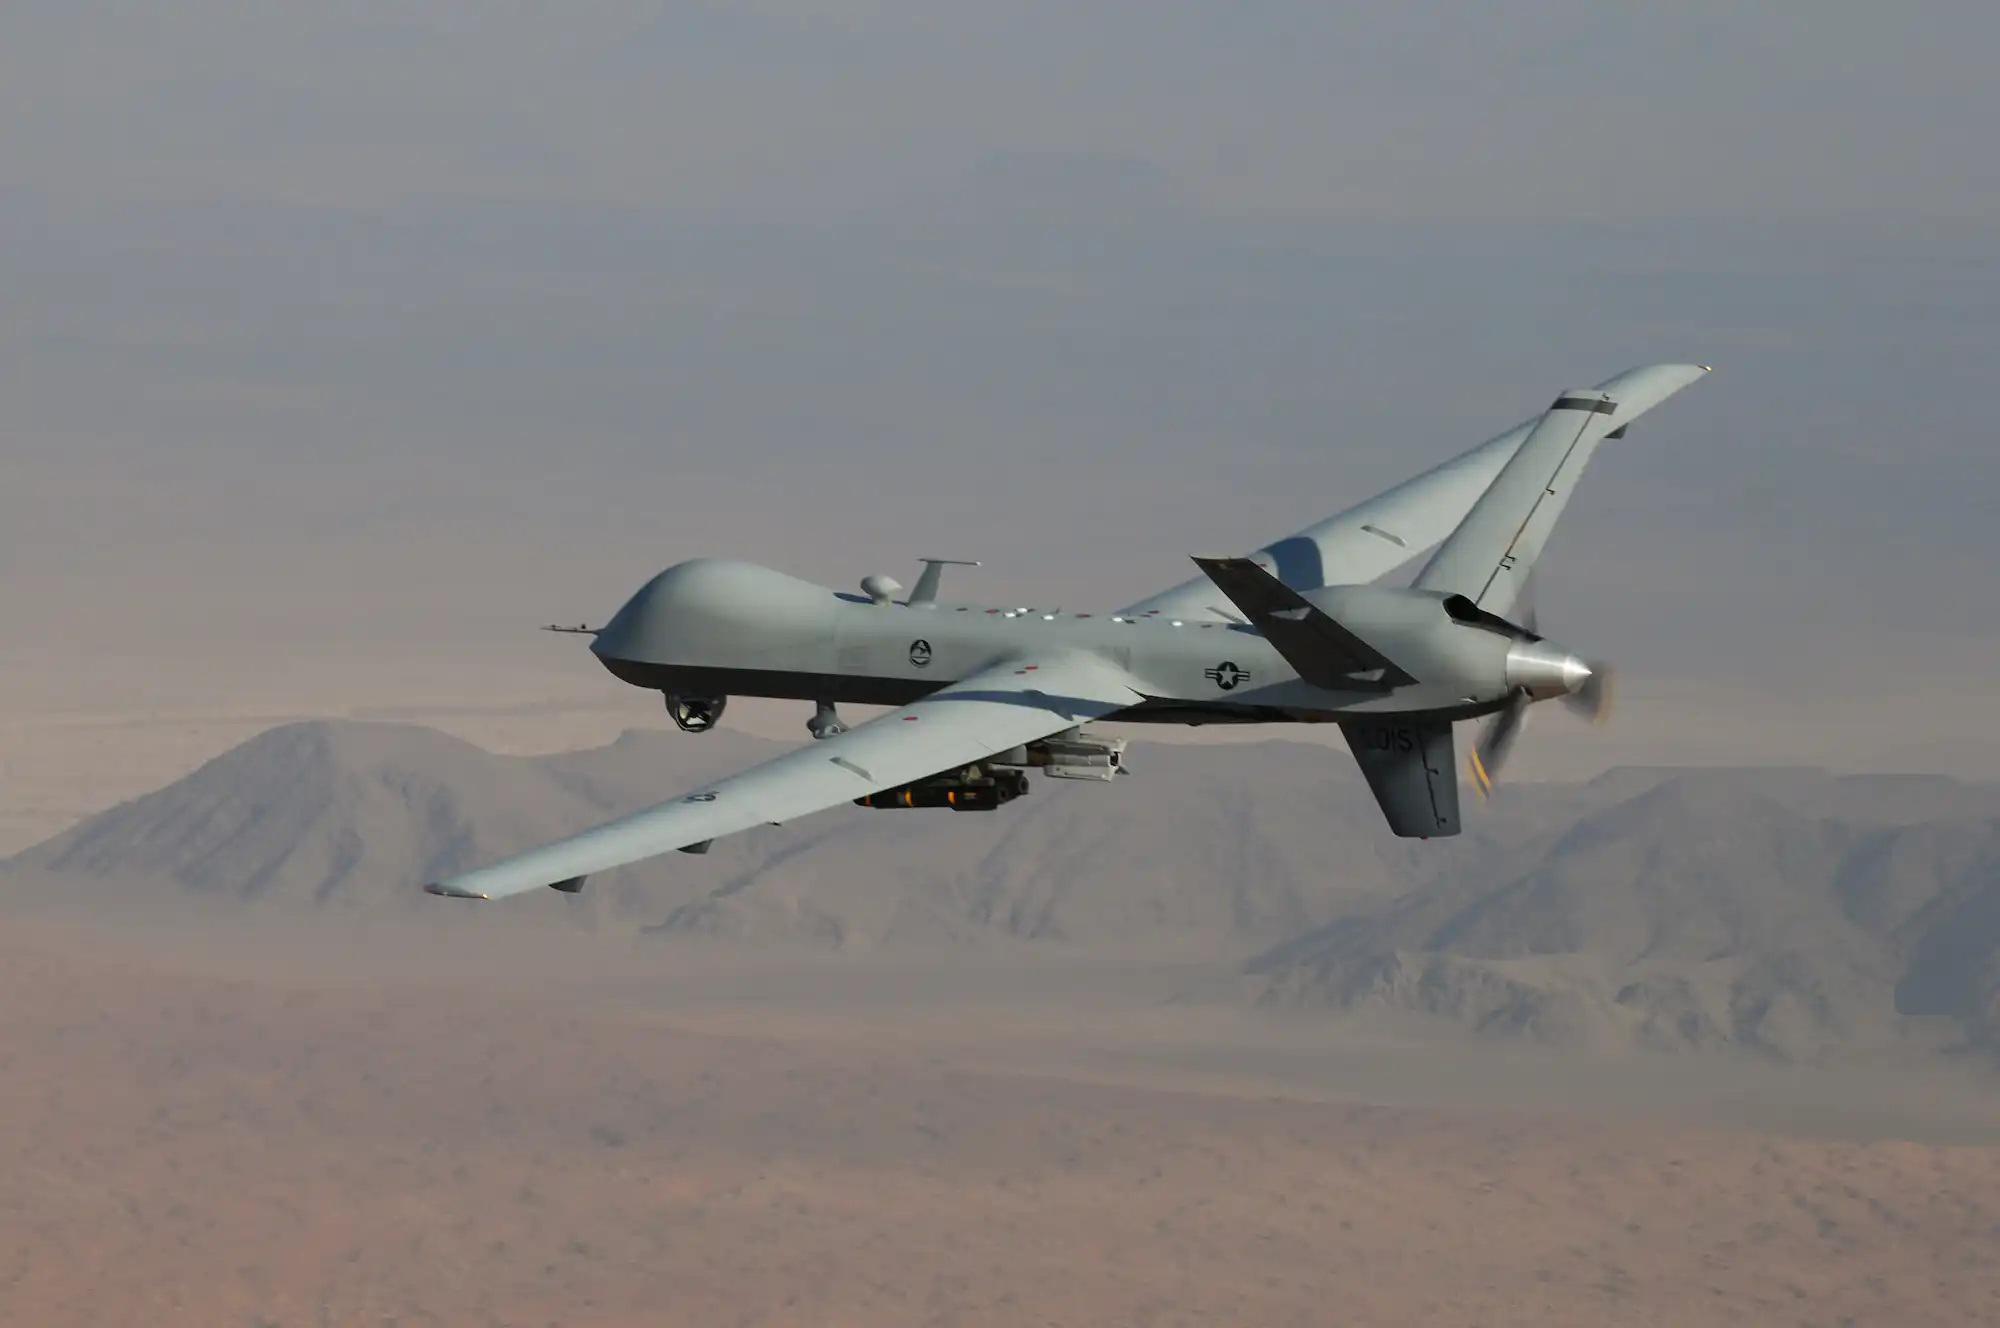 US drone, like the ones acting in Baghdad